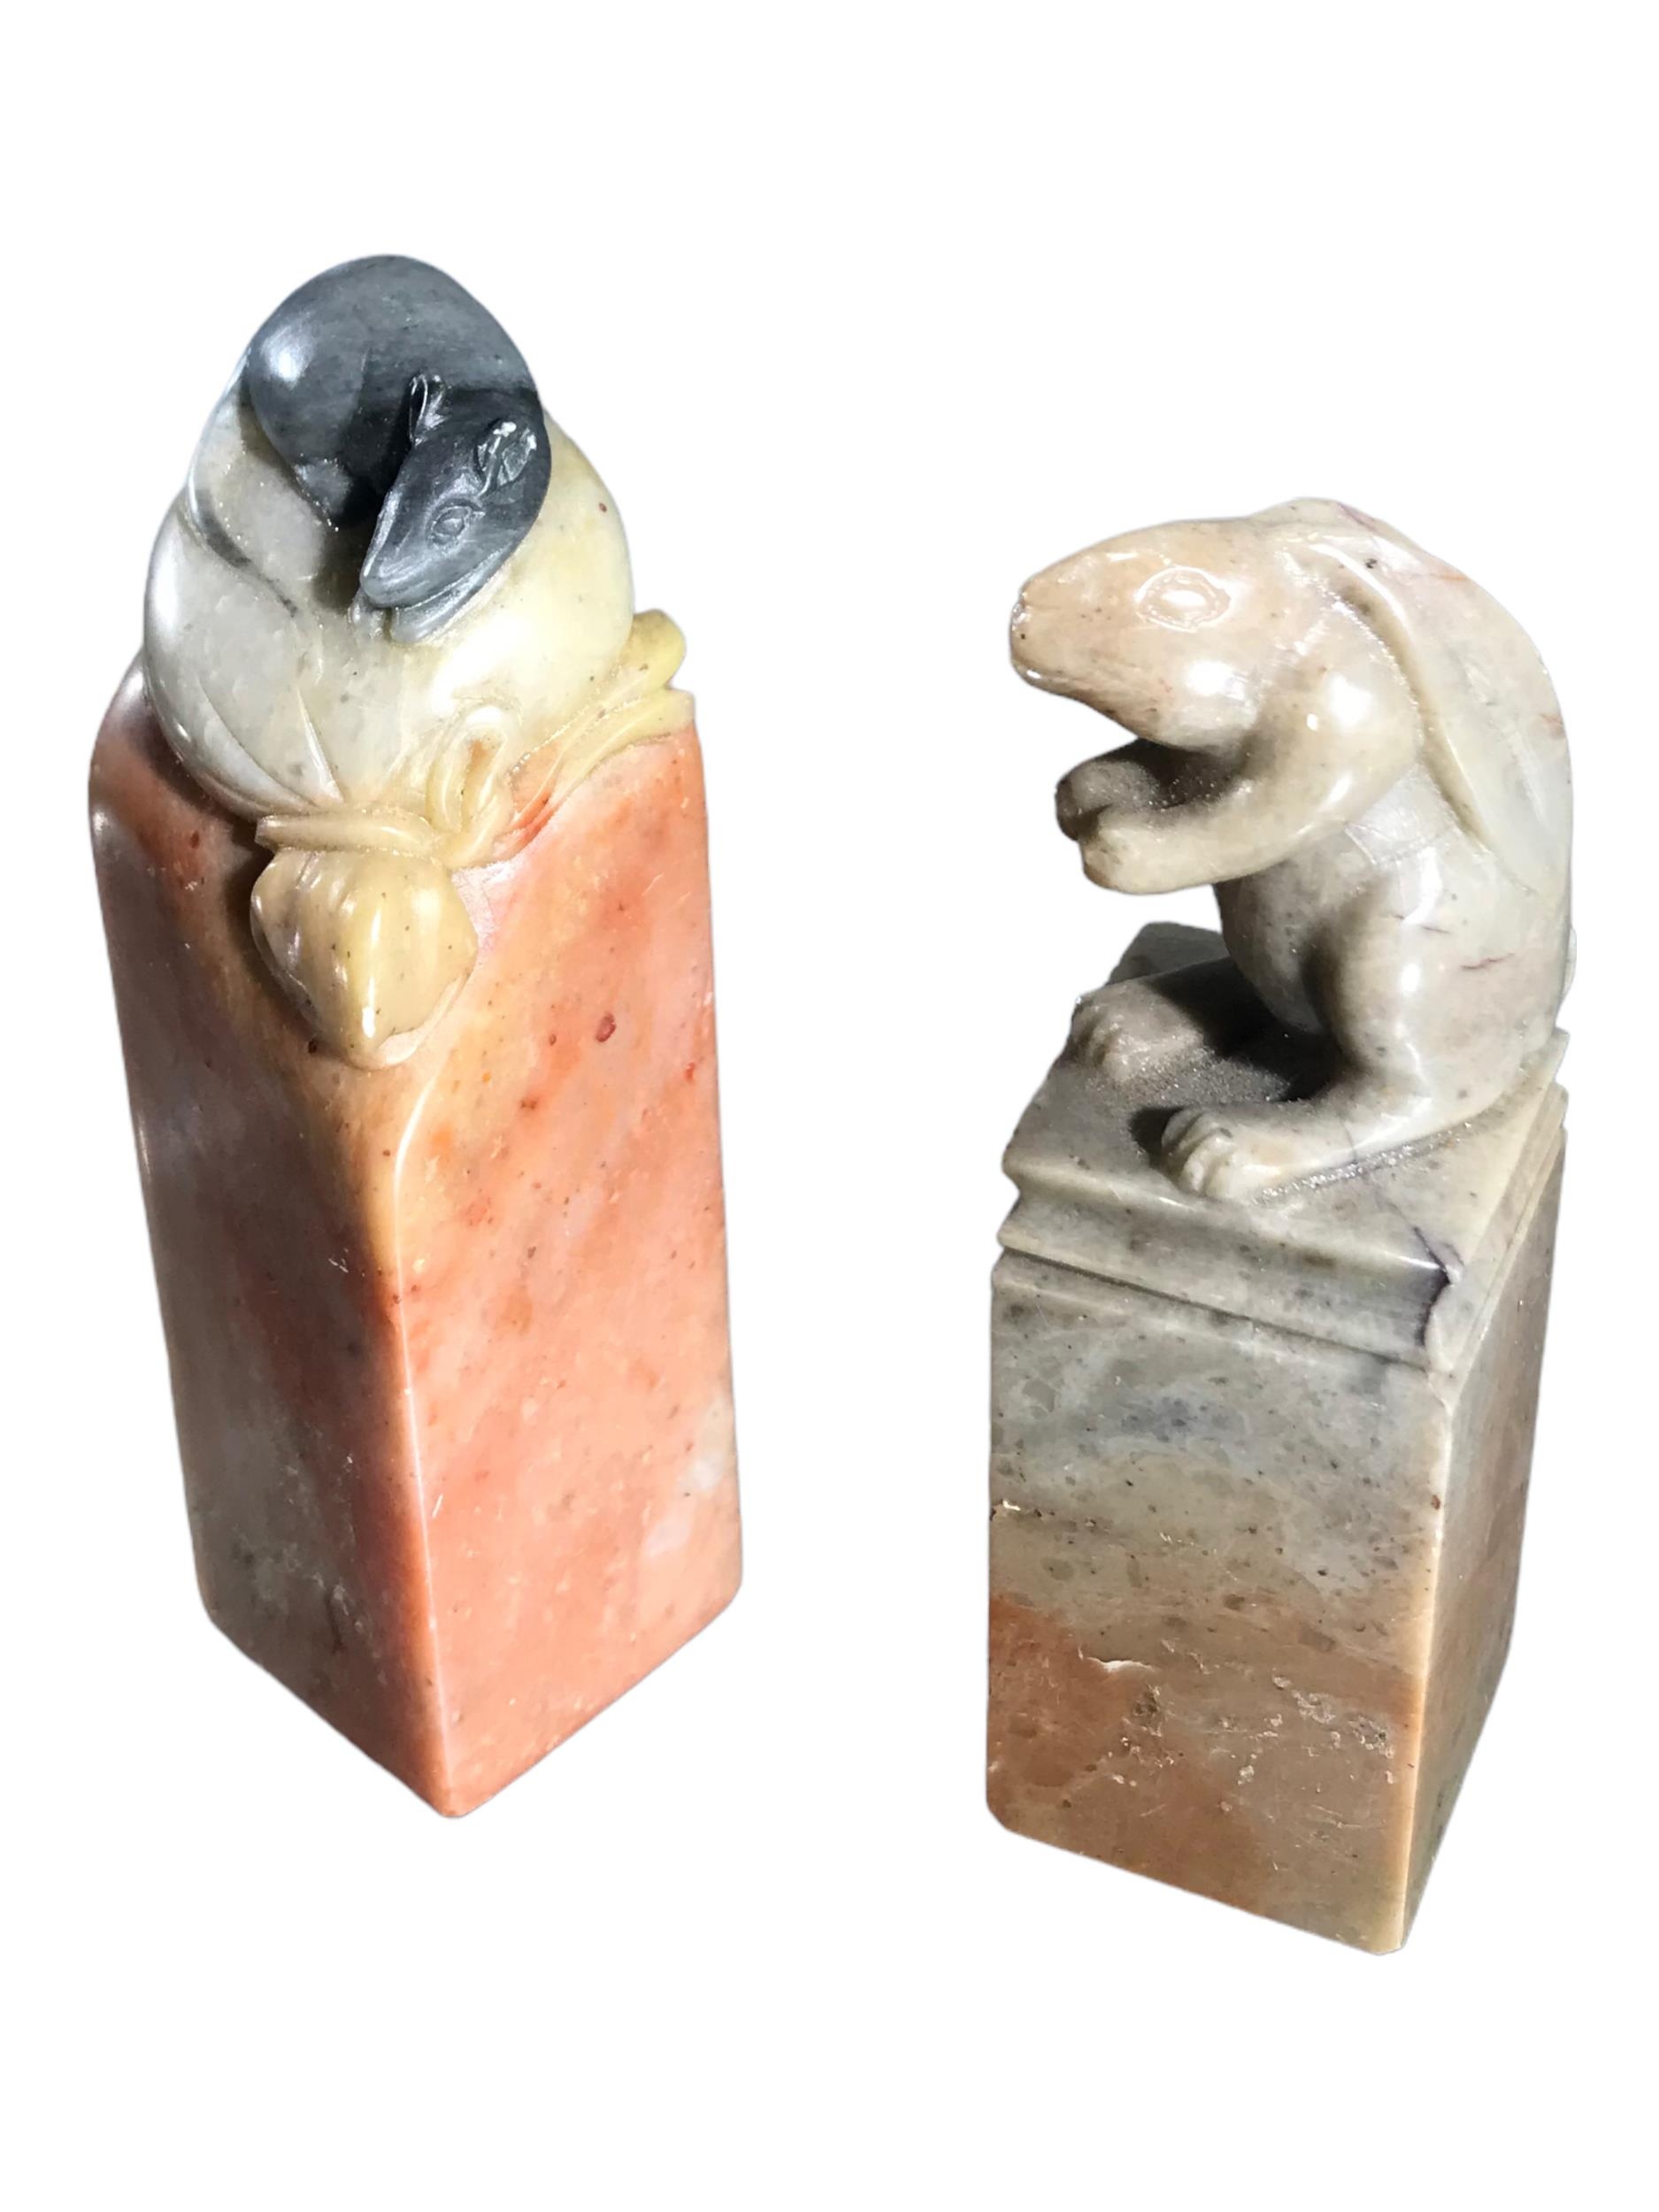 WITHDRAWN TWO CHINESE CARVED SOAPSTONE SEALS HAVING HARE AND RAT FINIALS. (h 8.5cm x w 2.4cm x depth